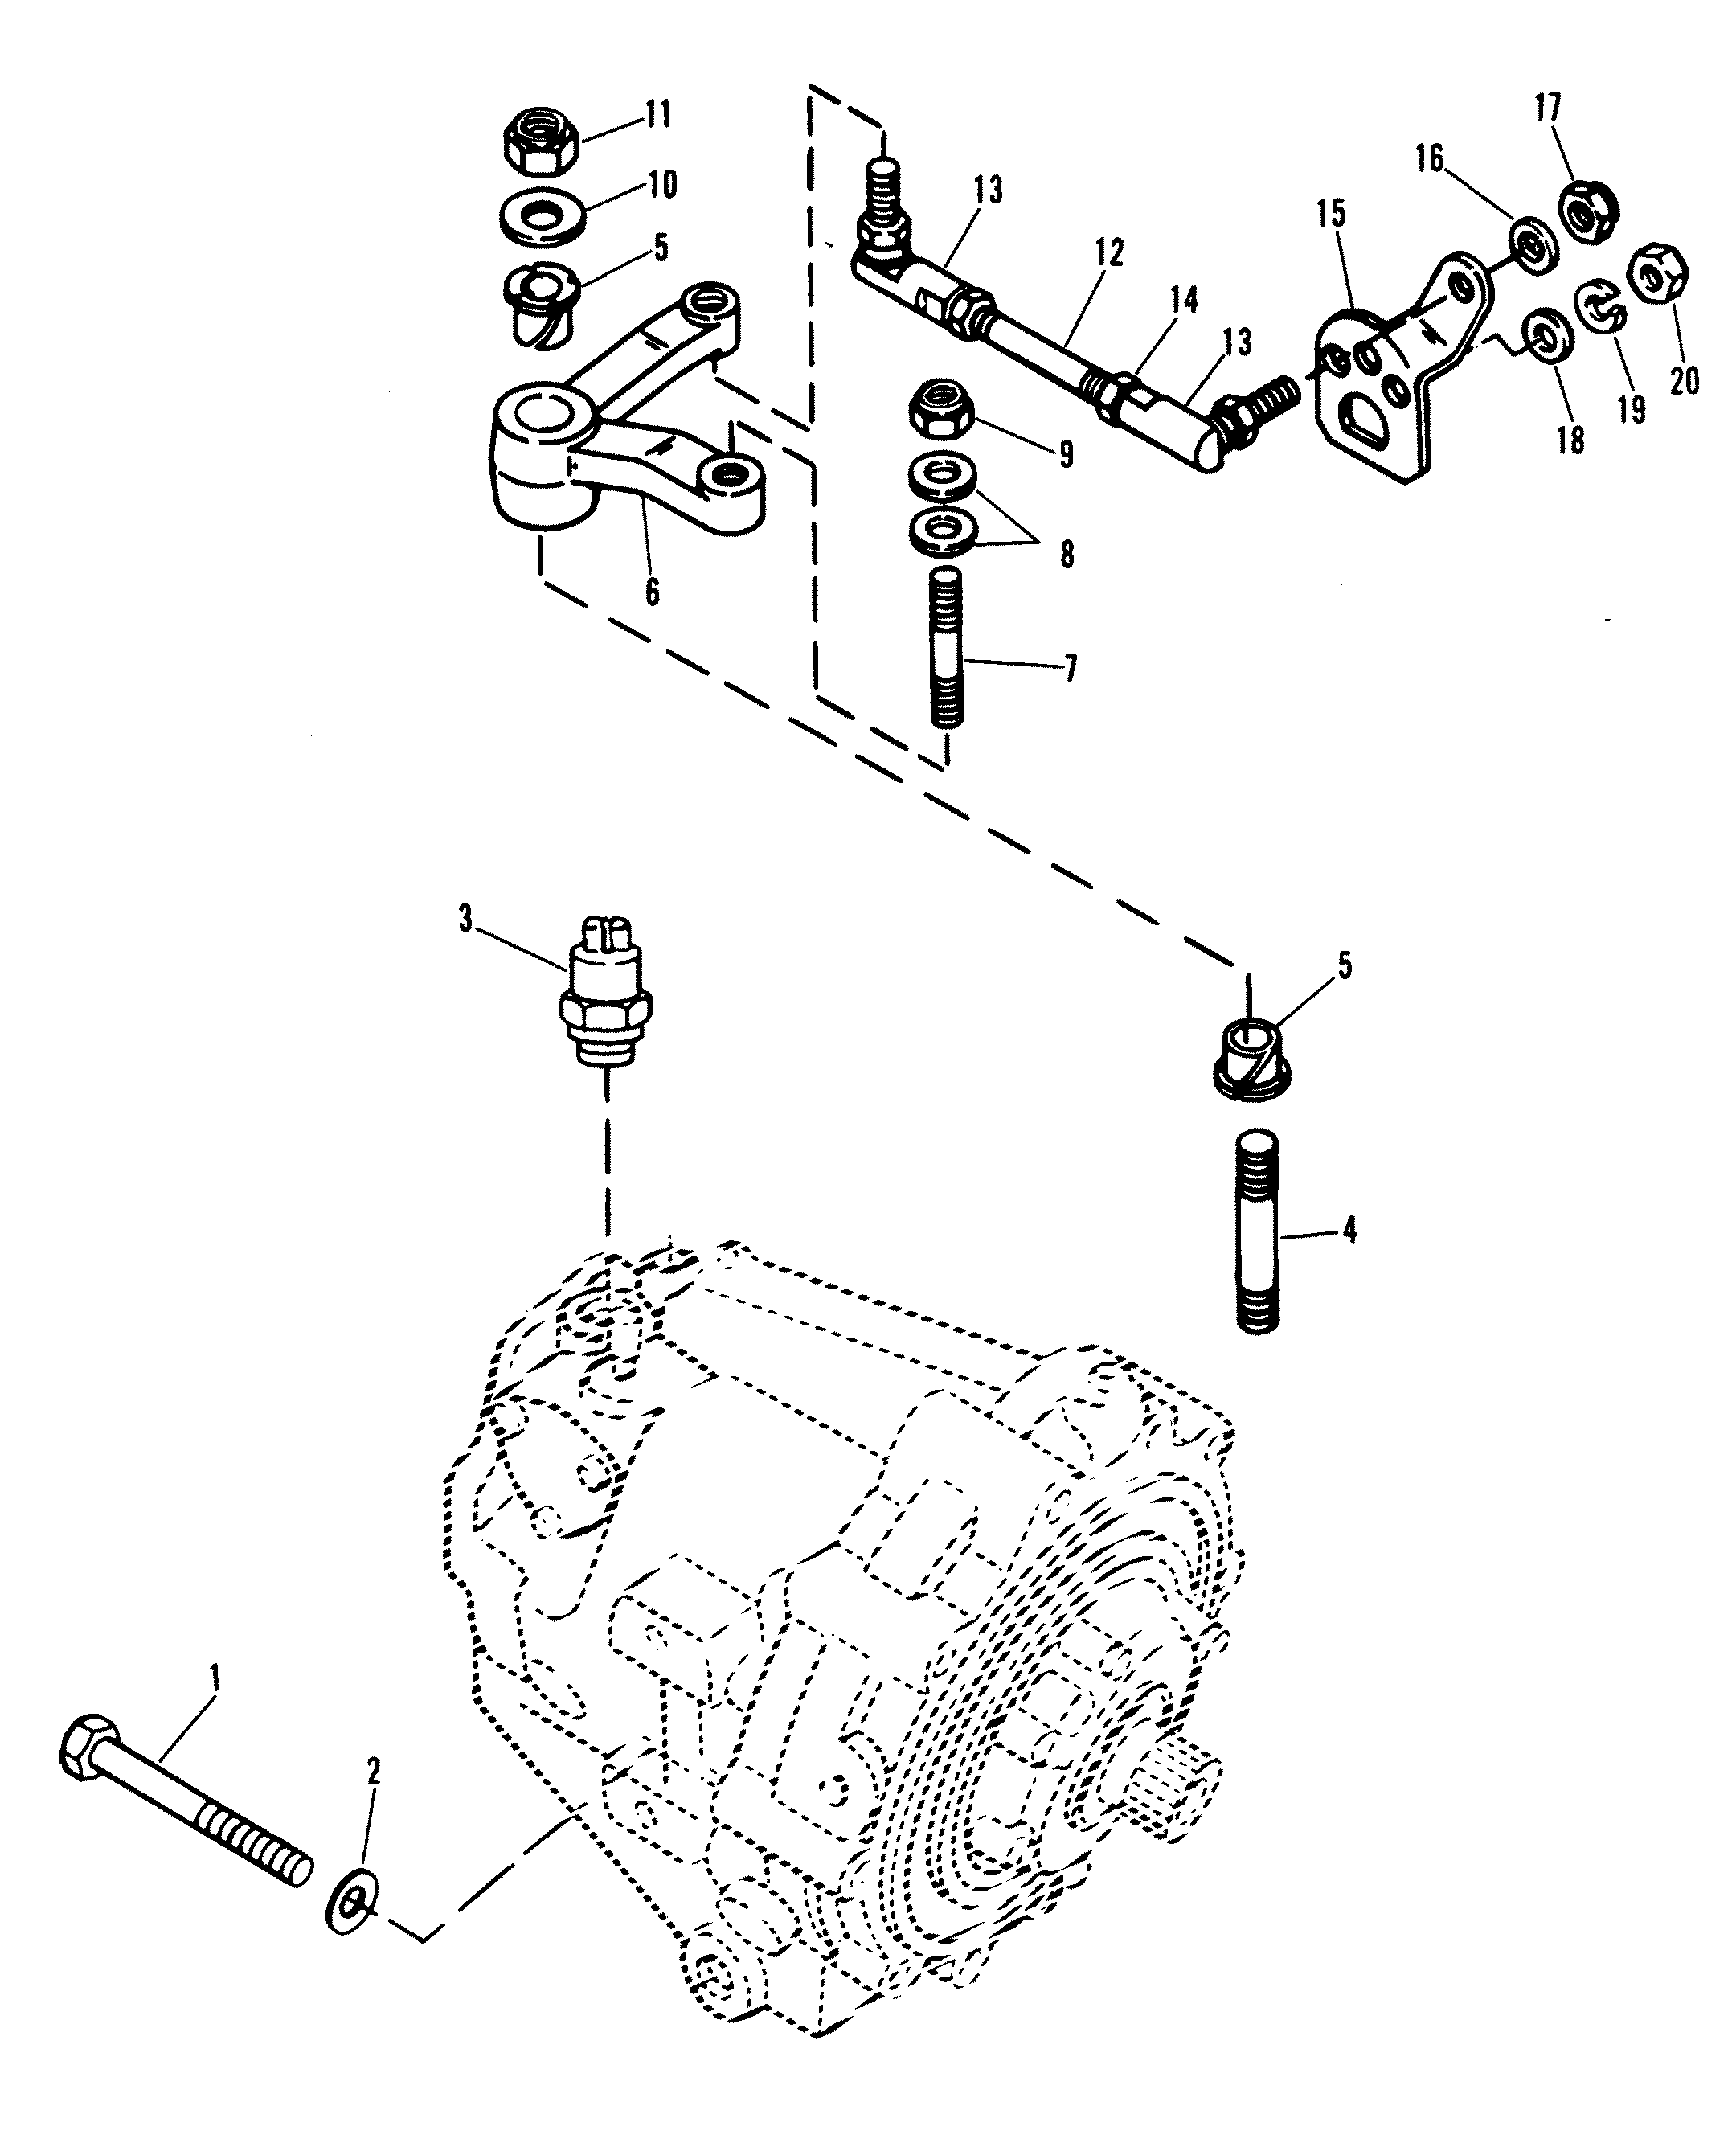 TRANSMISSION AND SHIFT LINKAGE